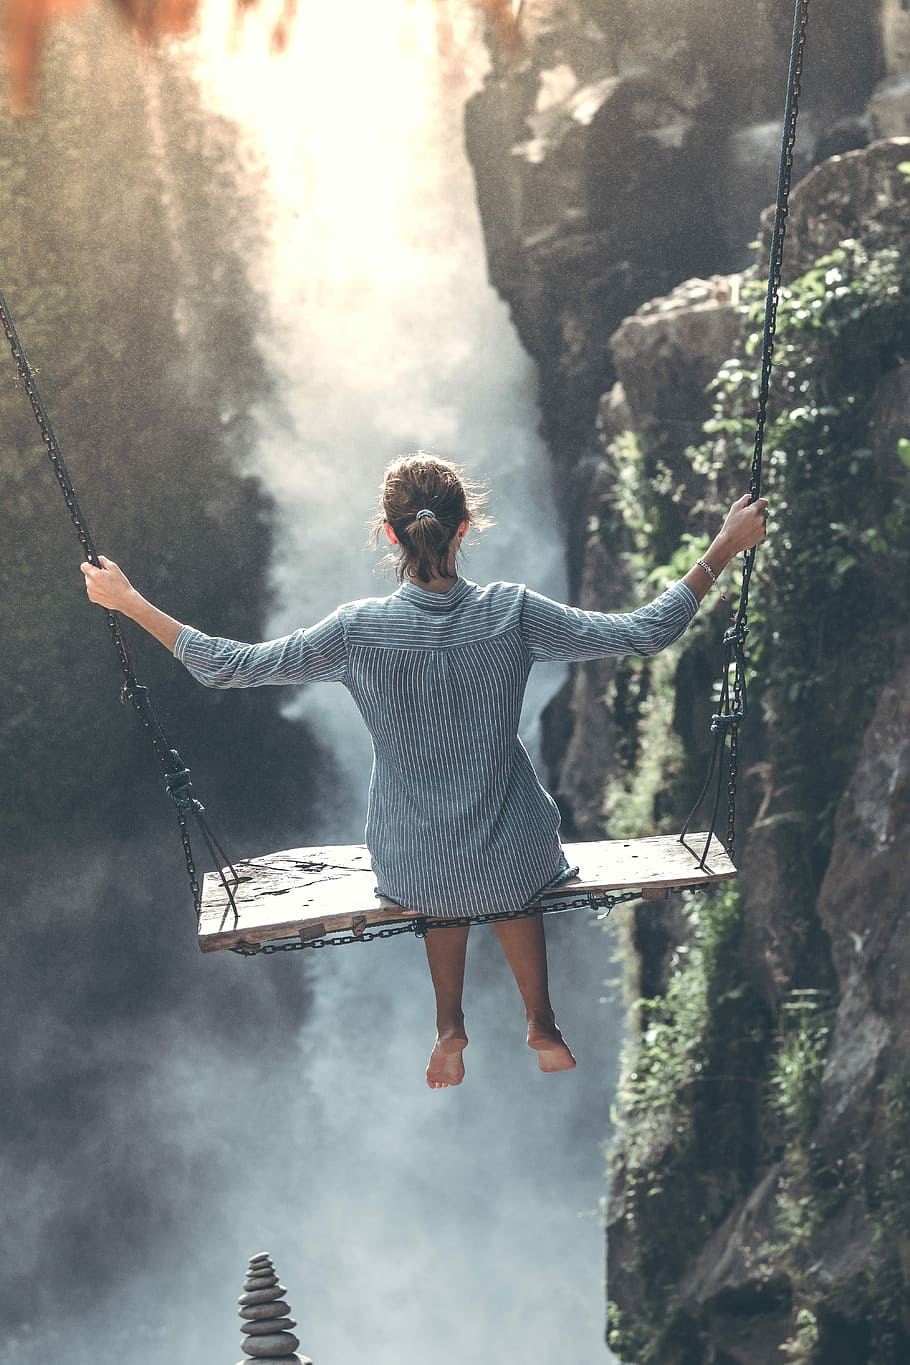 woman riding on wooden swing, woman sitting on swing, person